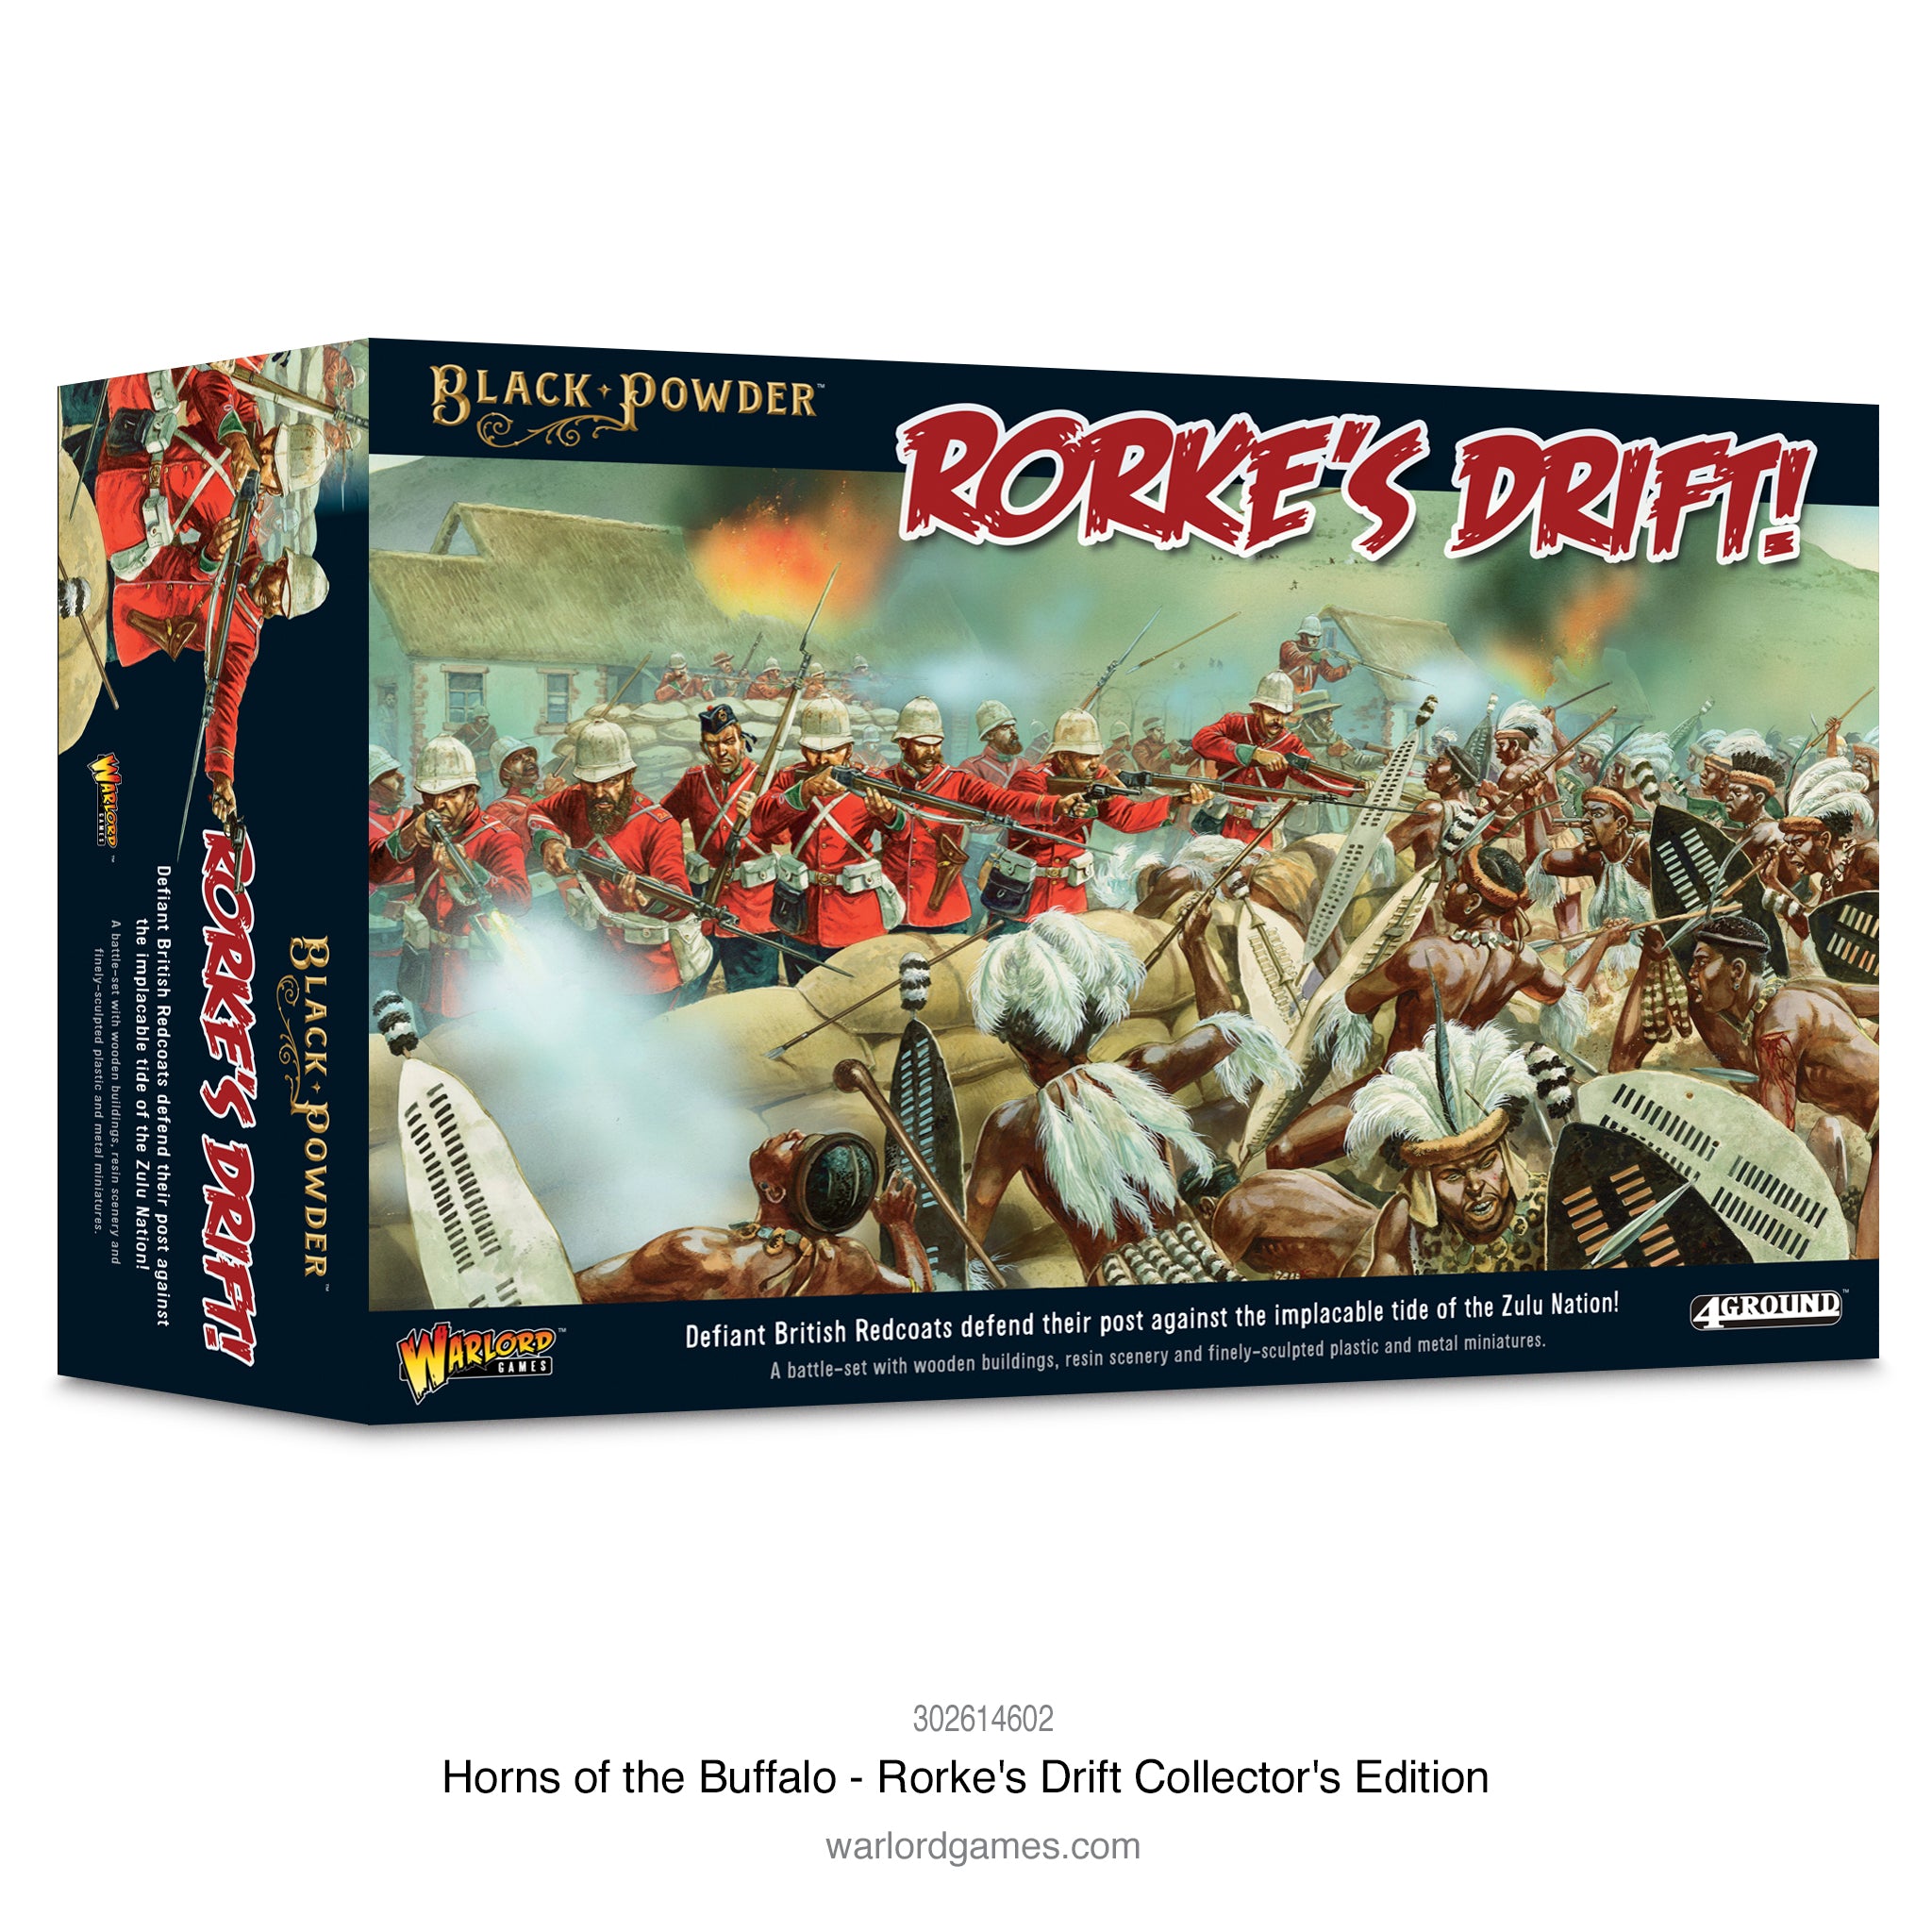 Horns of the Buffalo - Rorke's Drift collectors edition